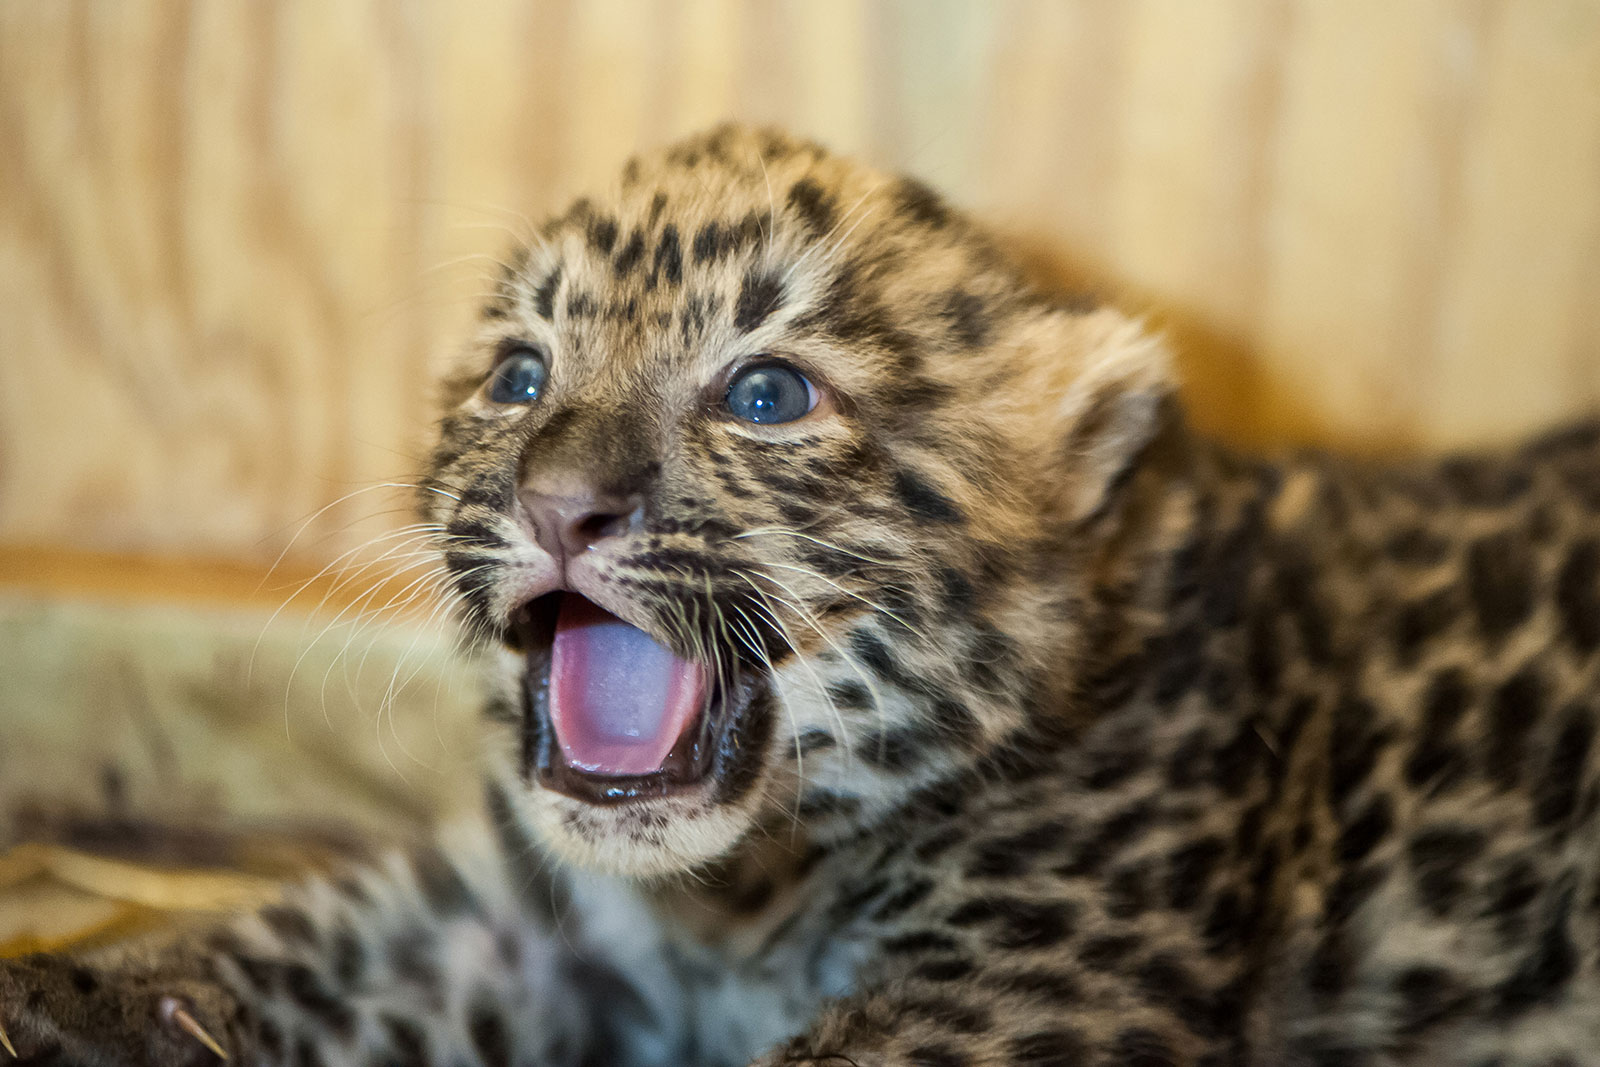 Passing This Animal Kingdom Quiz Is the Only Proof You Need to Show You’re the Smart Friend Baby Leopard Cub